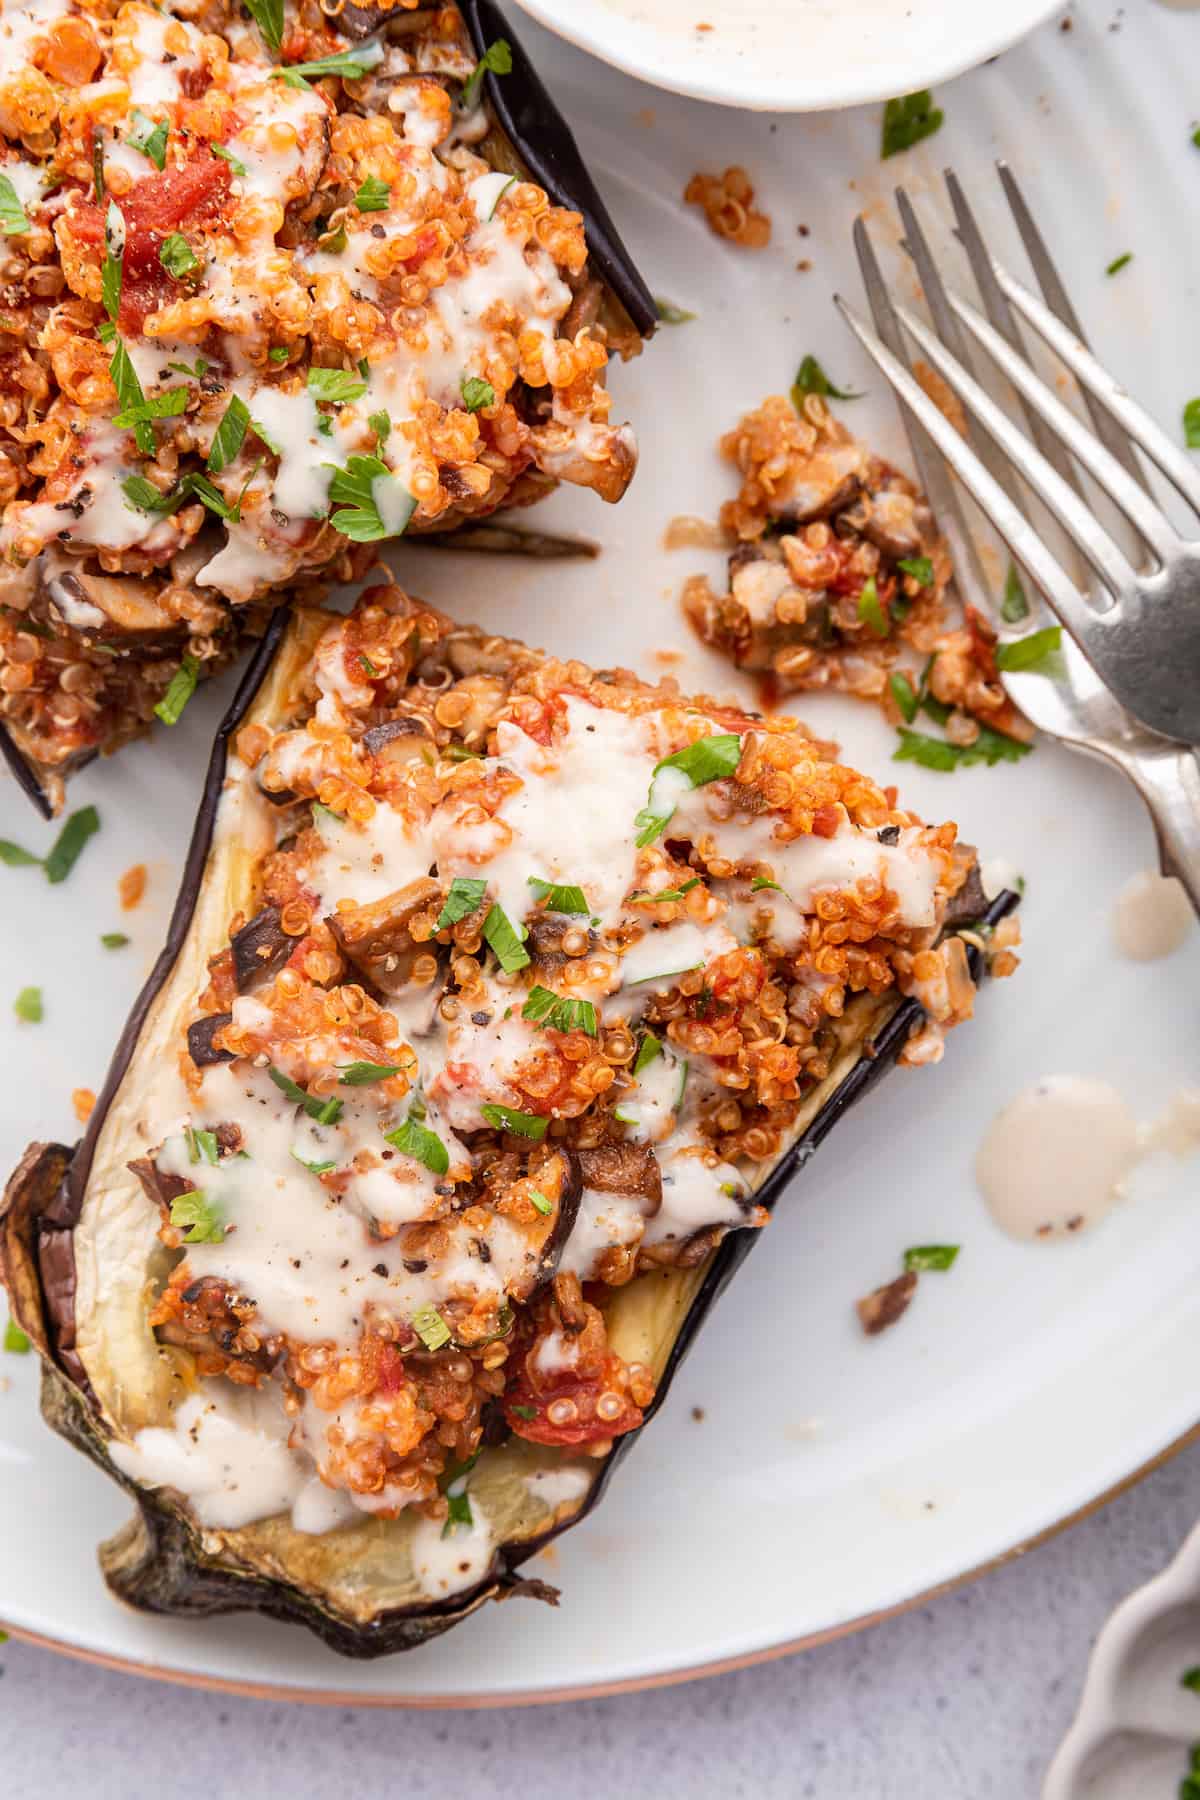 Overhead view of stuffed eggplant on plate with tahini drizzle